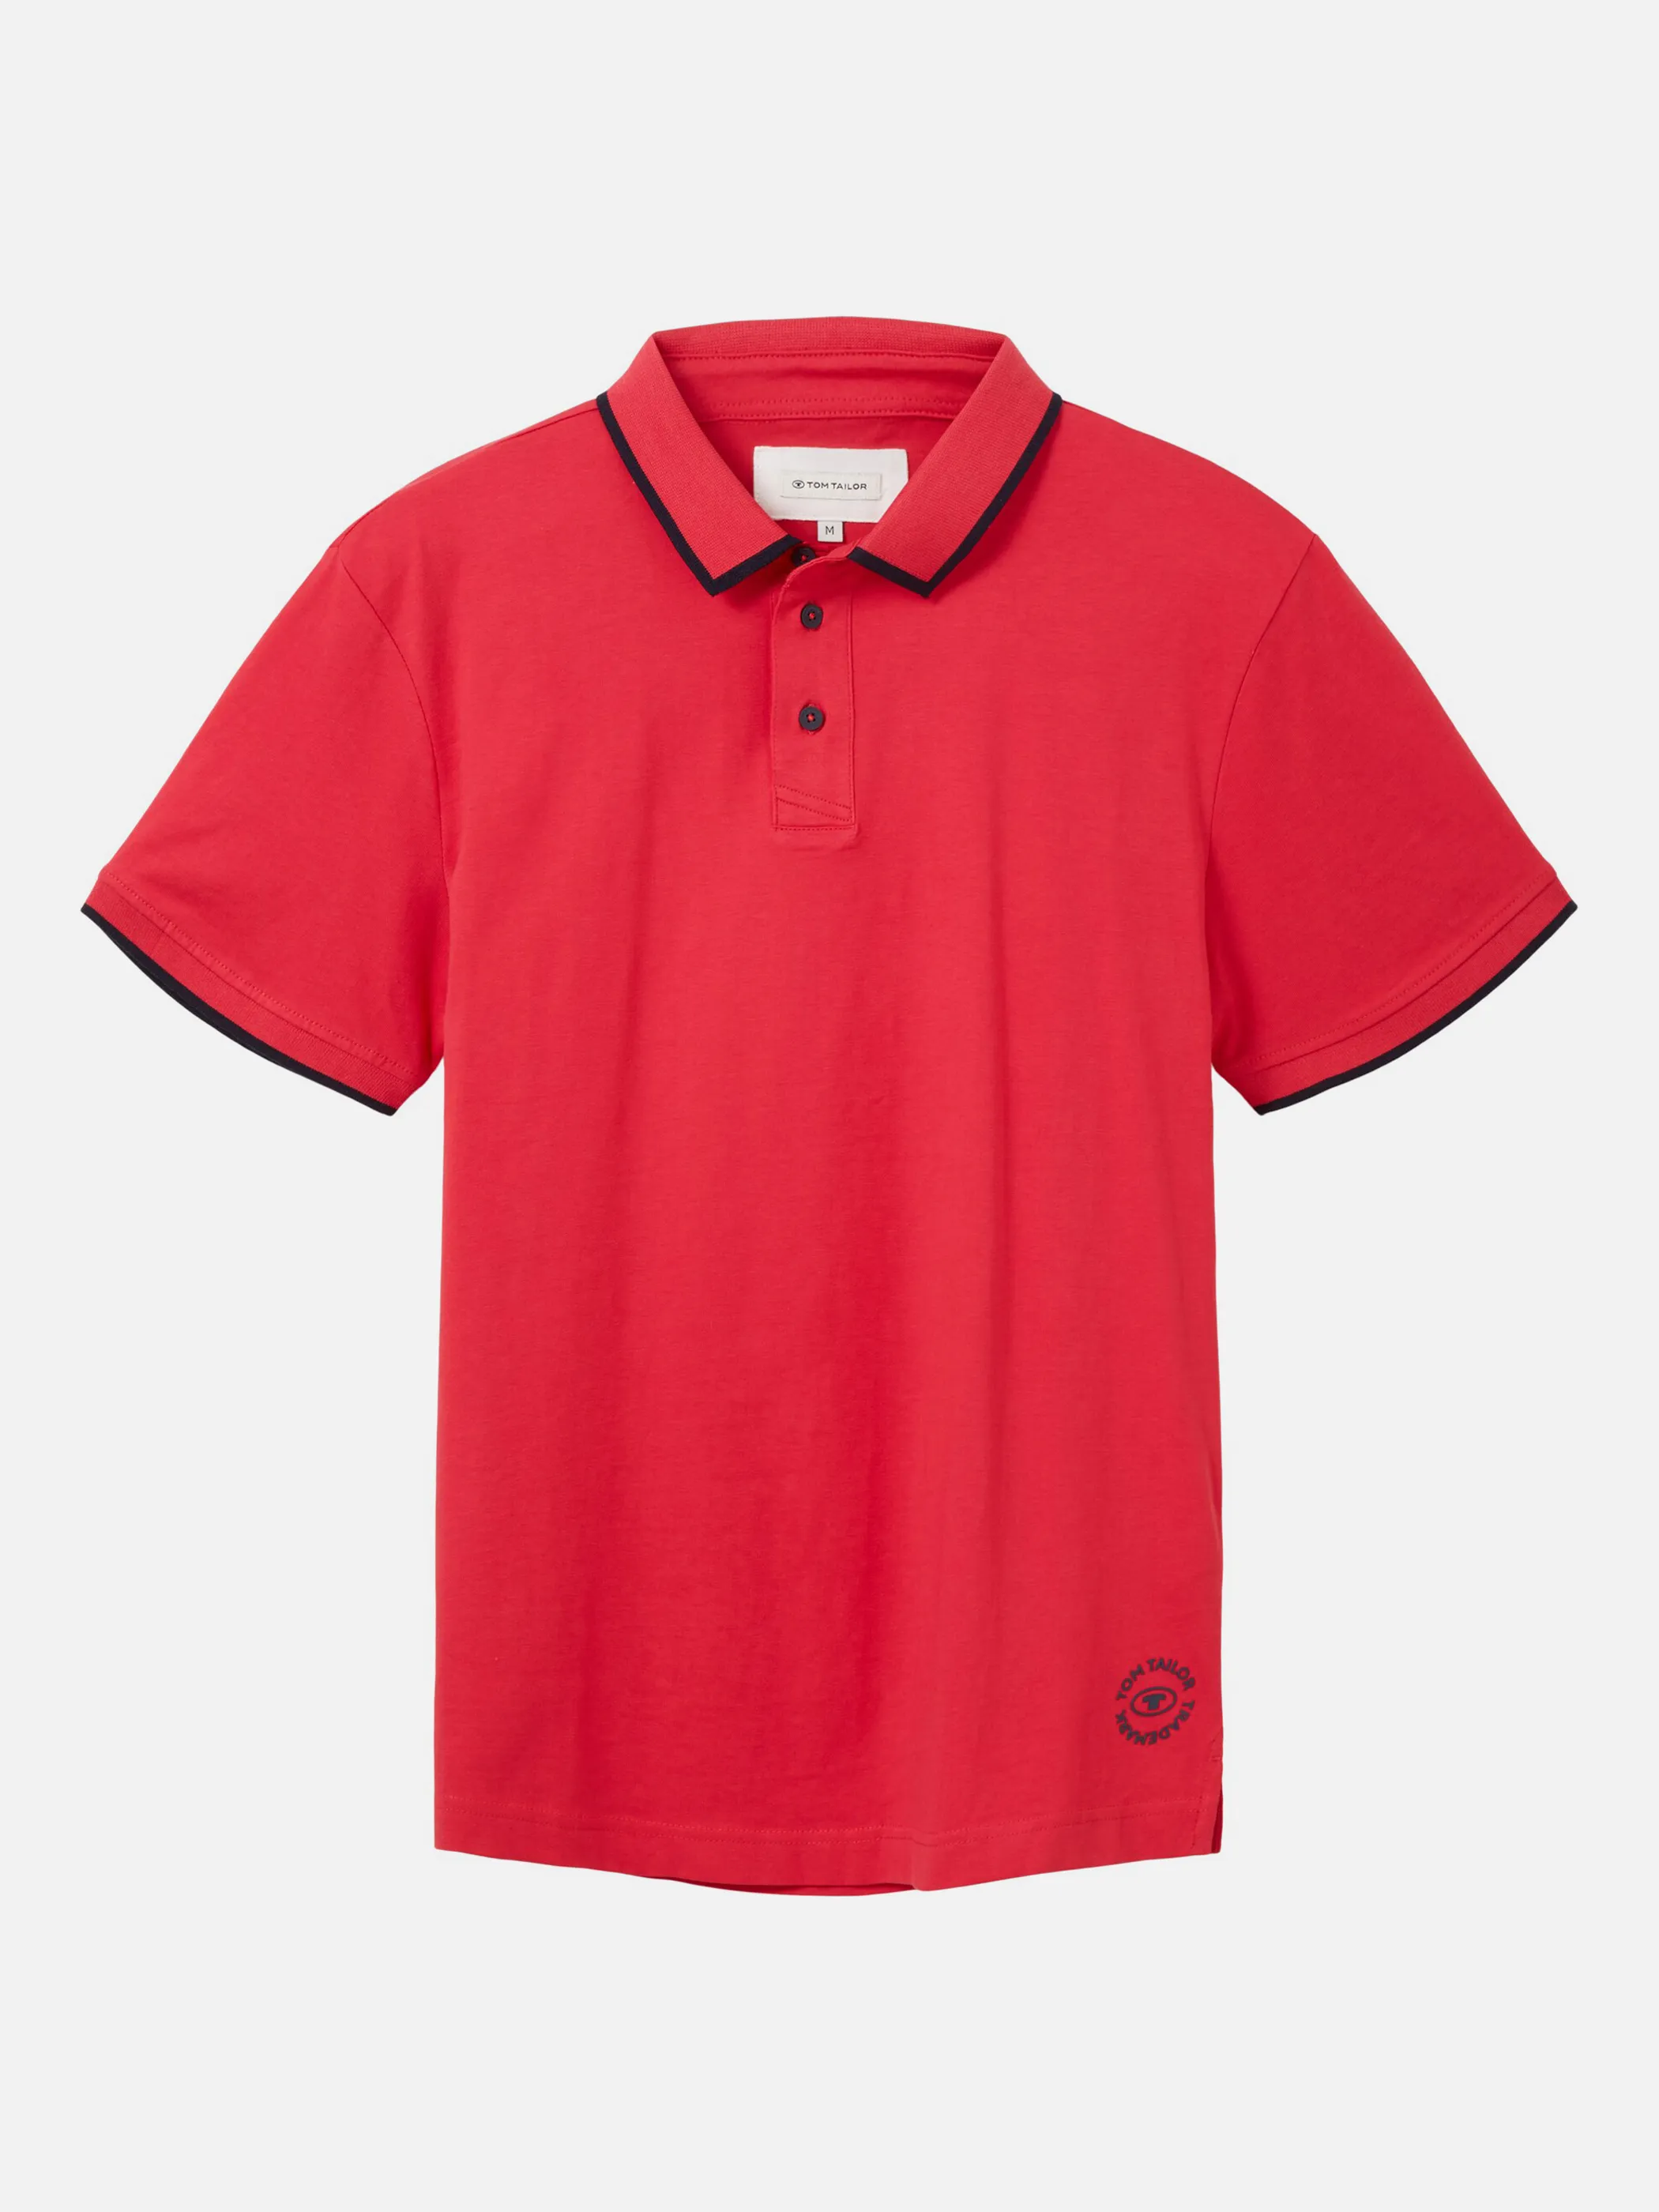 Tom Tailor 1036327 sportive jersey polo Rot 880547 31045 1